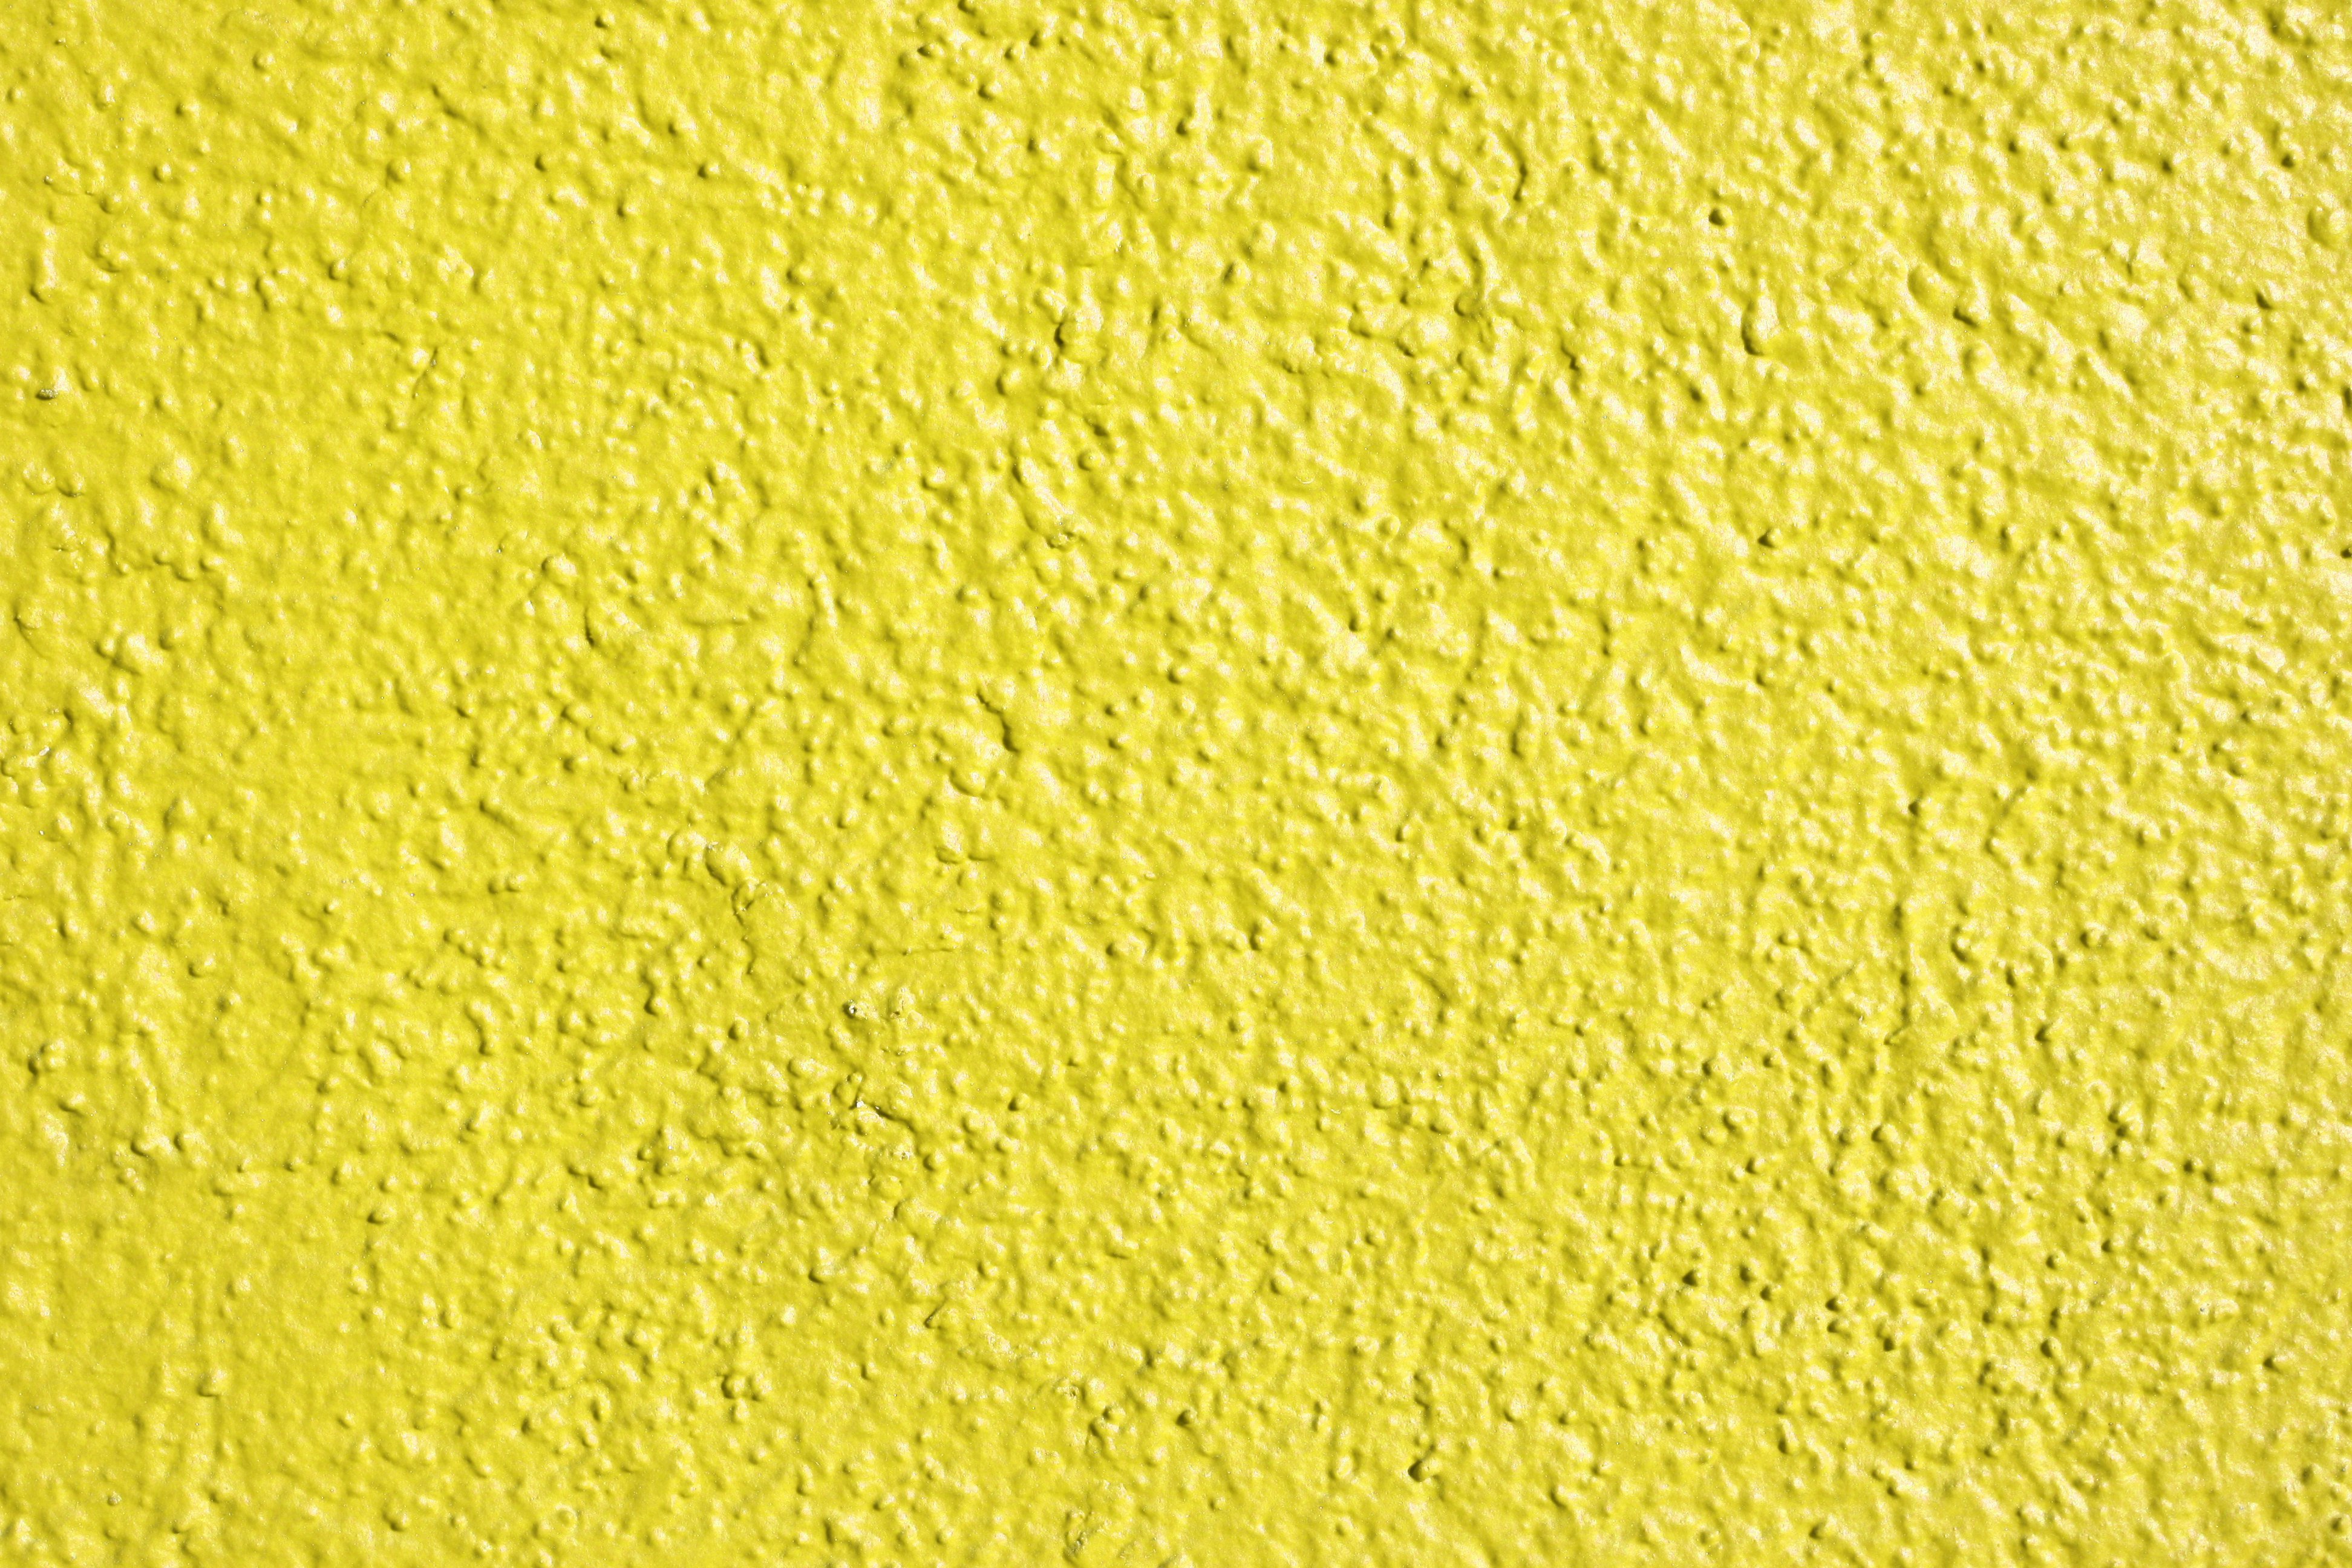 Yellow Painted Wall Texture Picture | Free Photograph | Photos ...